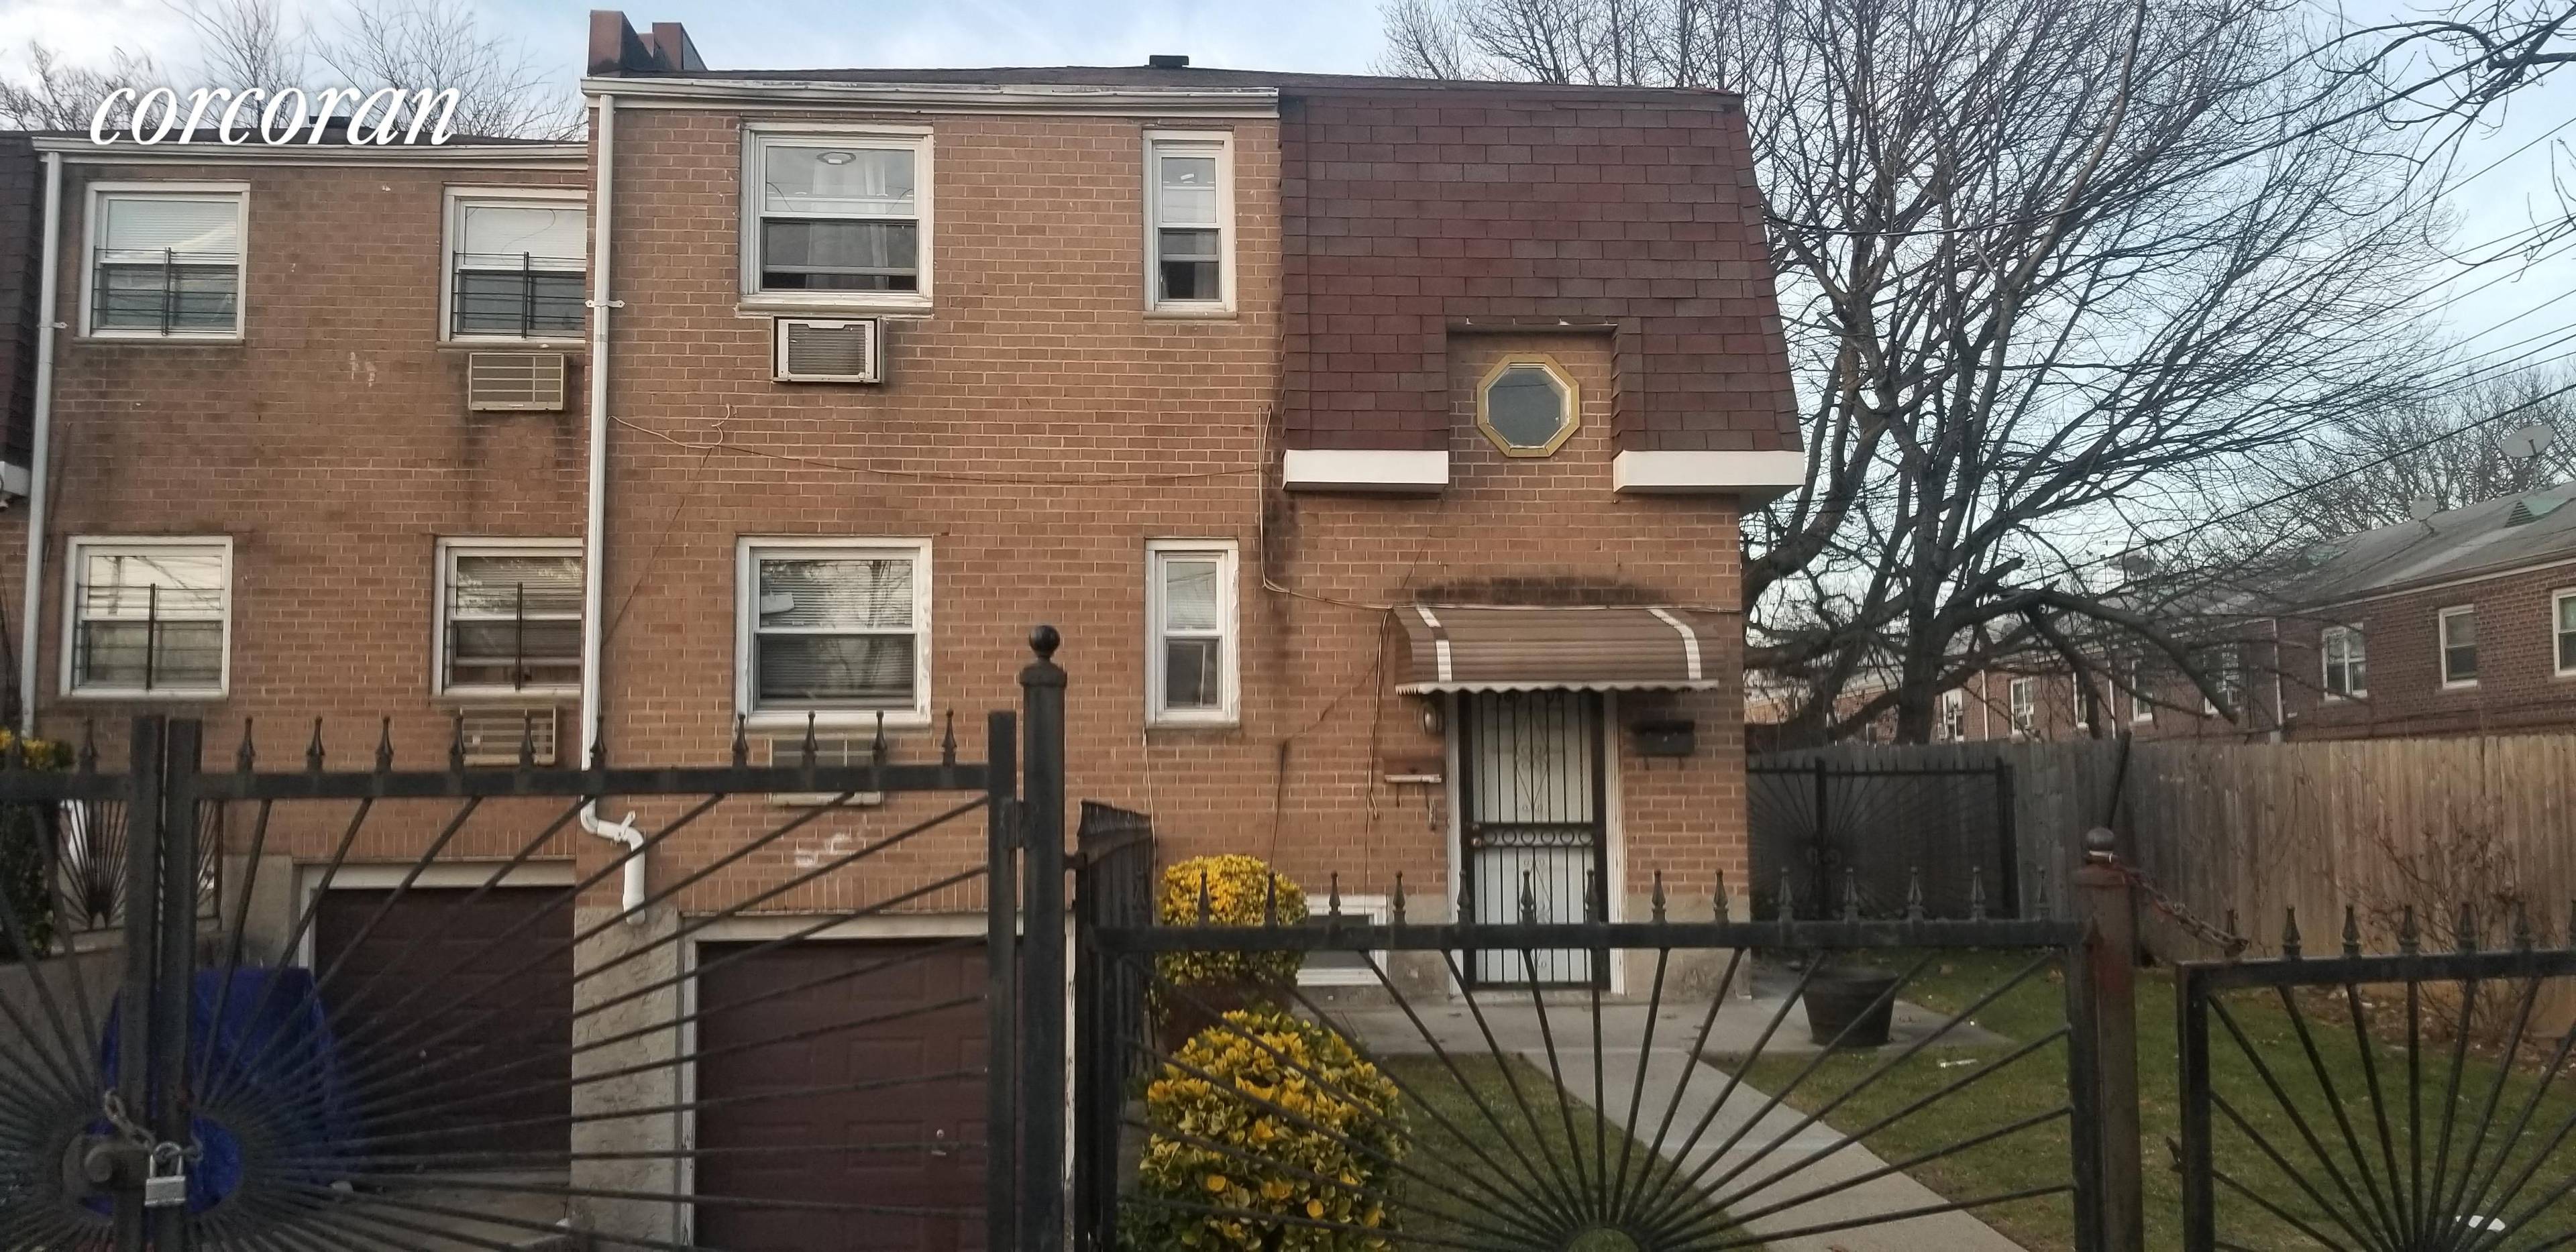 A large Multi unit home in St Albans, Queens NY, with 6 bedrooms, 5 baths, 2 kitchens, wood floors, high ceilings, finished Basement, driveway, backyard, on a tree lined block.